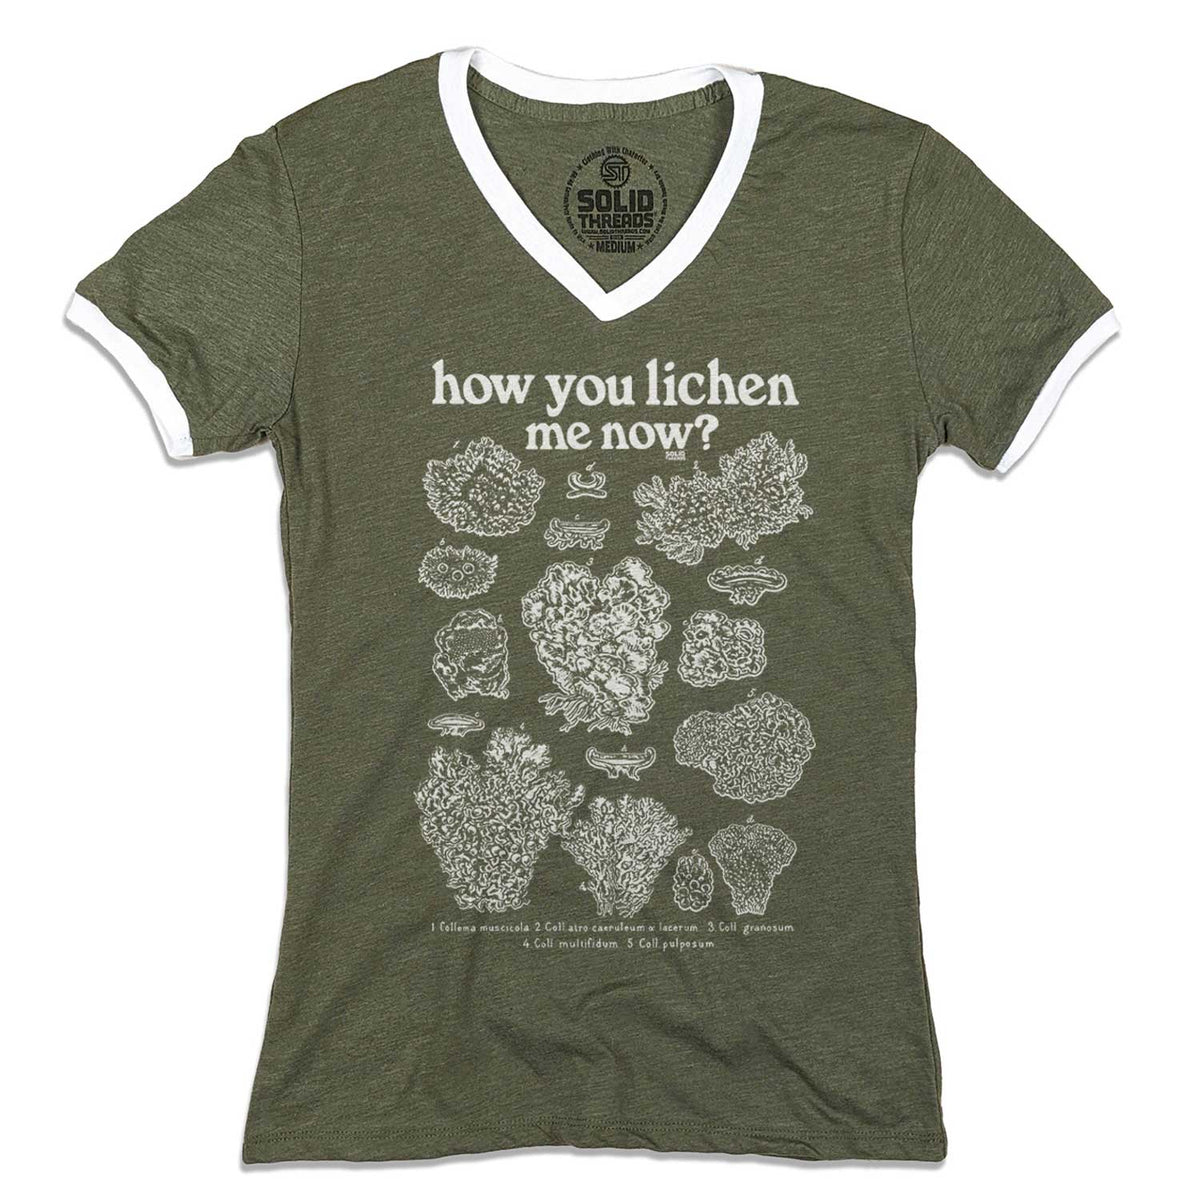 Women&#39;s How You Lichen Me Now Vintage Graphic V-Neck Tee | Funny Moss T-shirt | Solid Threads